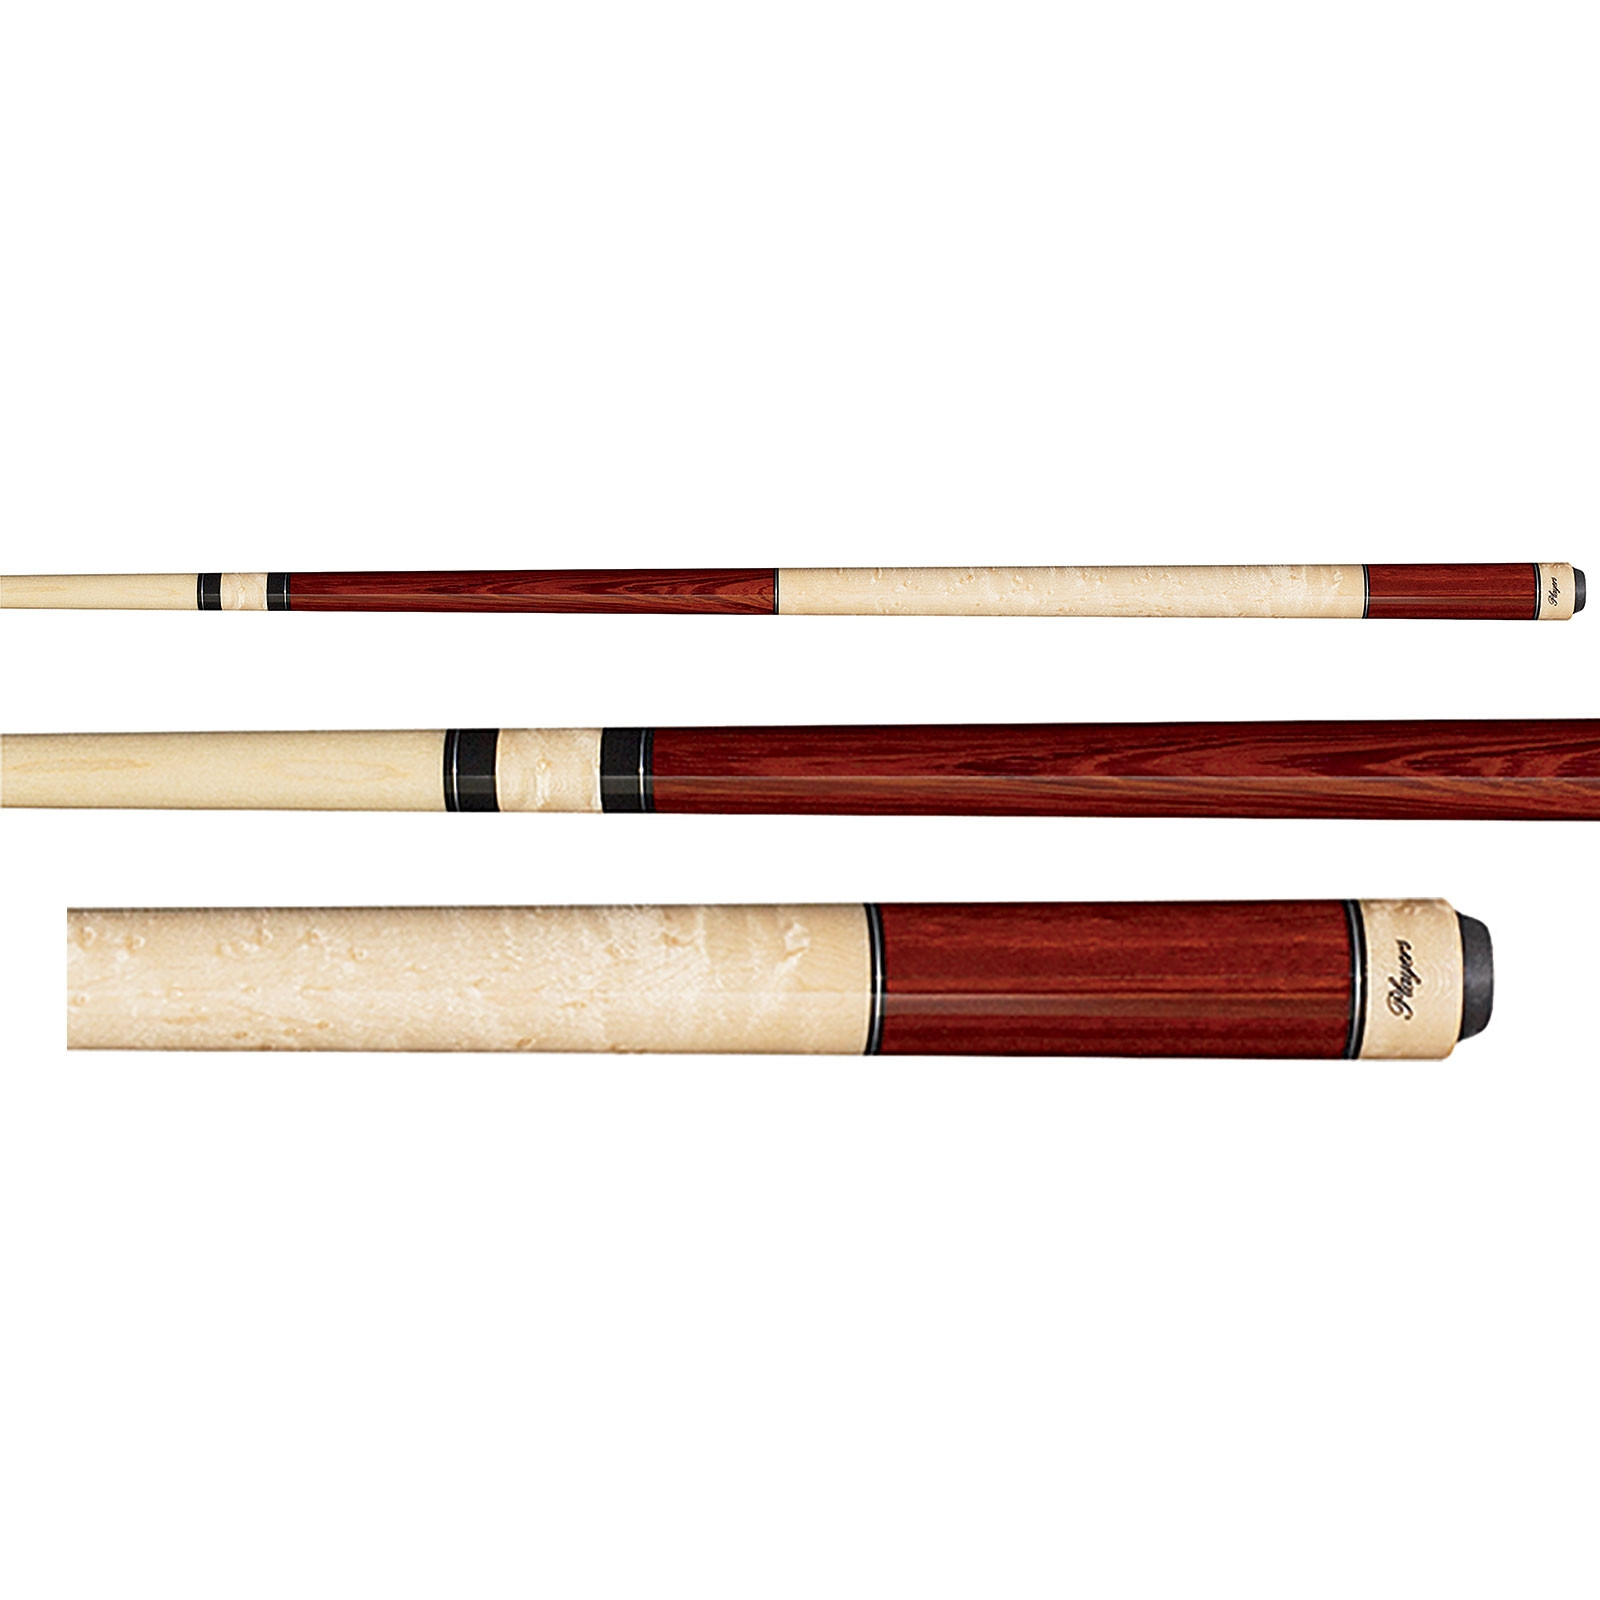 Players E-3100 Exotic Rengas Pool Cue Stick